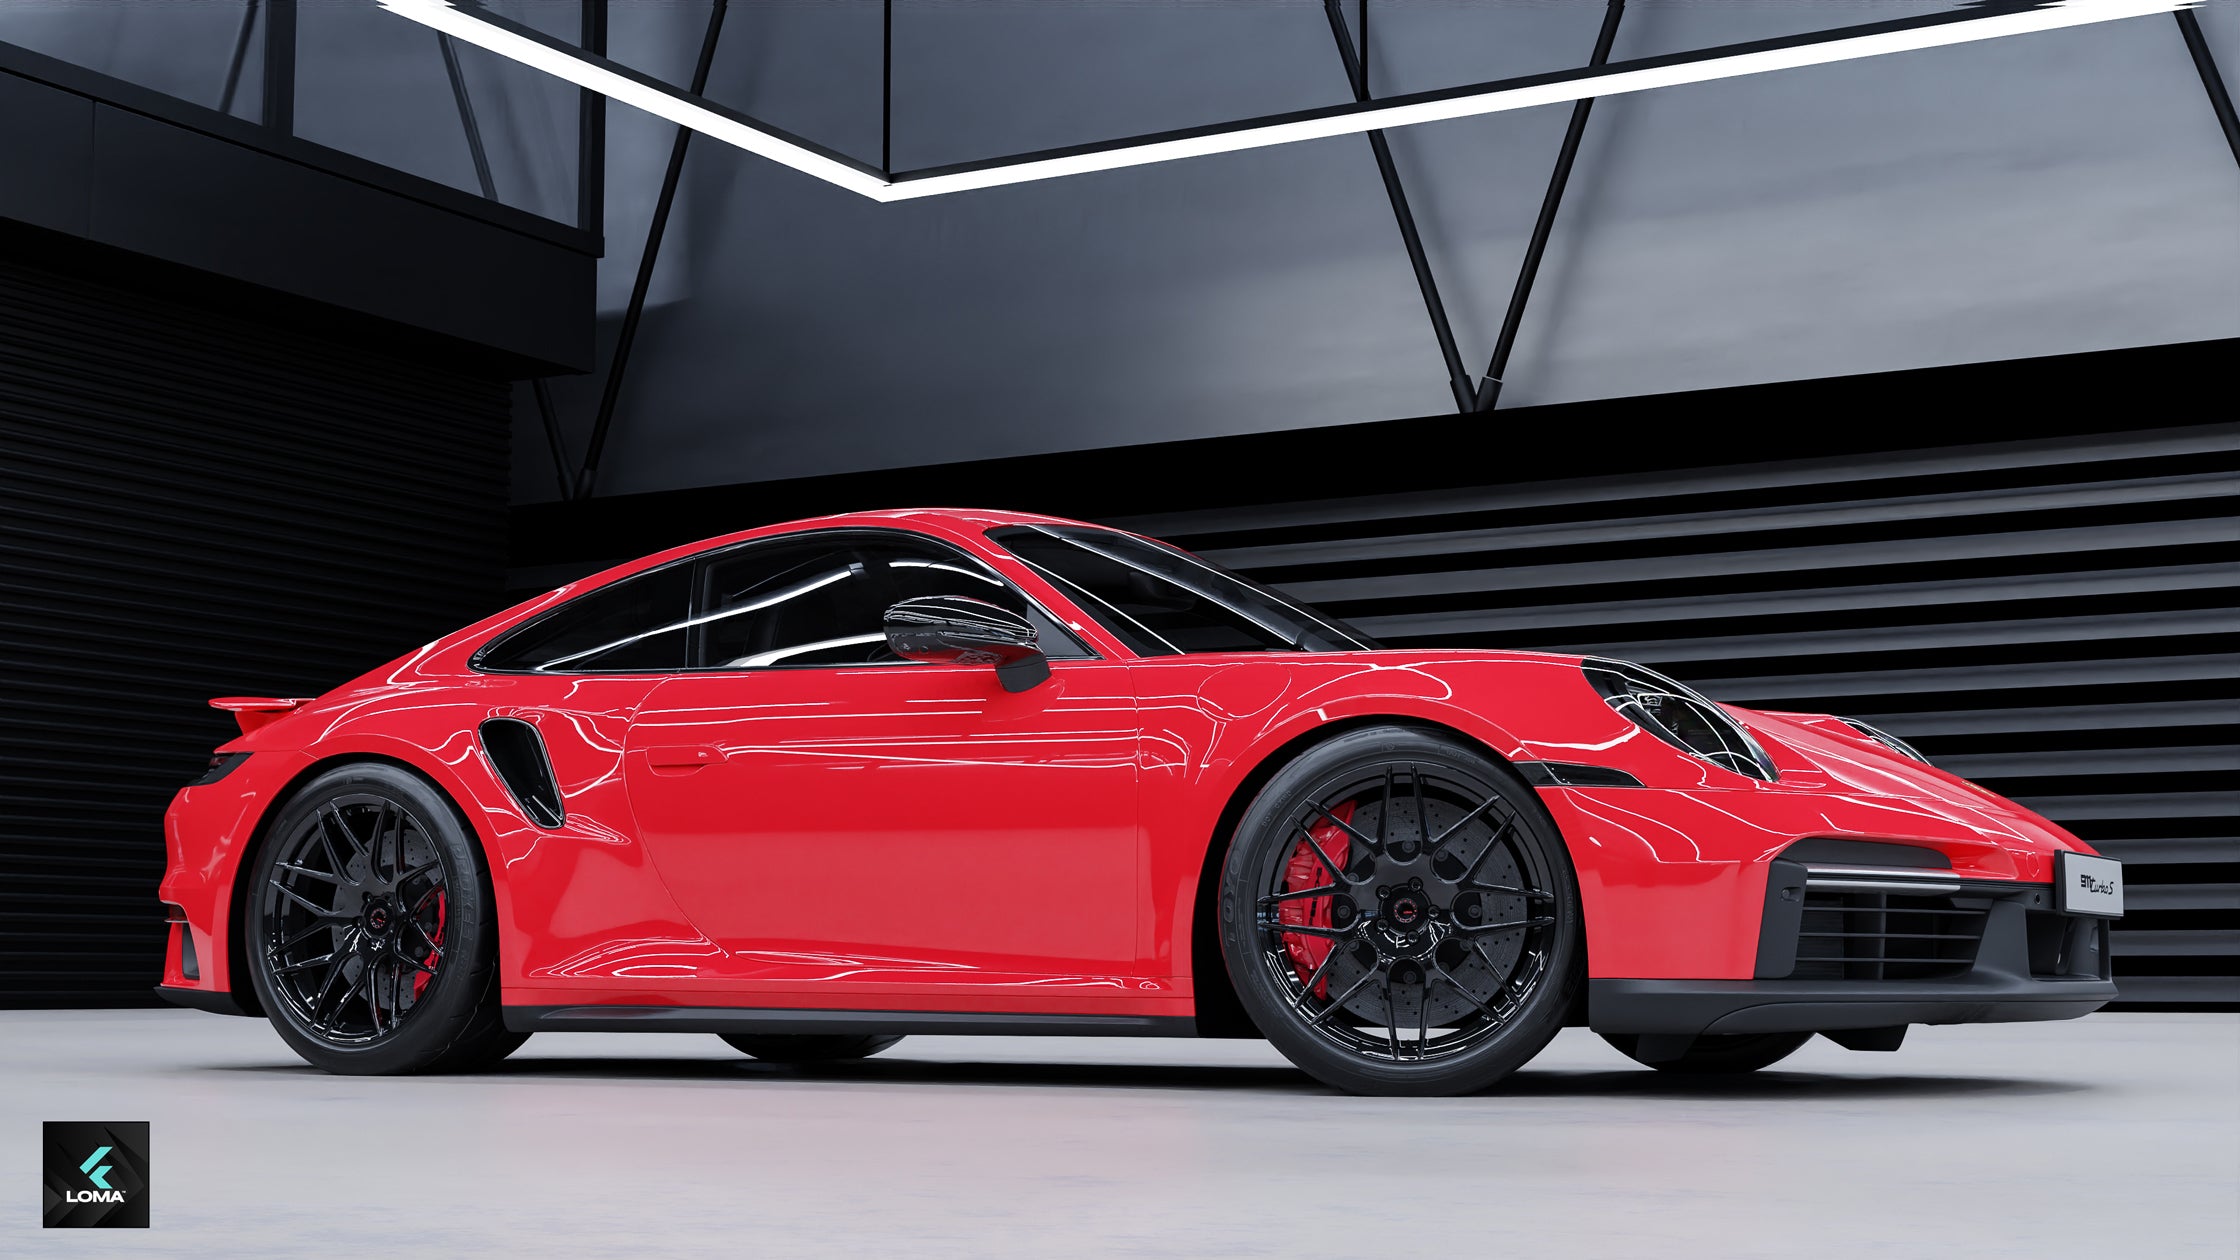 Red Porsche 992 Turbo S featuring LOMA Forged GTC aftermarket wheelsClose-up view of LOMA Forged GTC wheels on custom Porsche 992 Turbo S